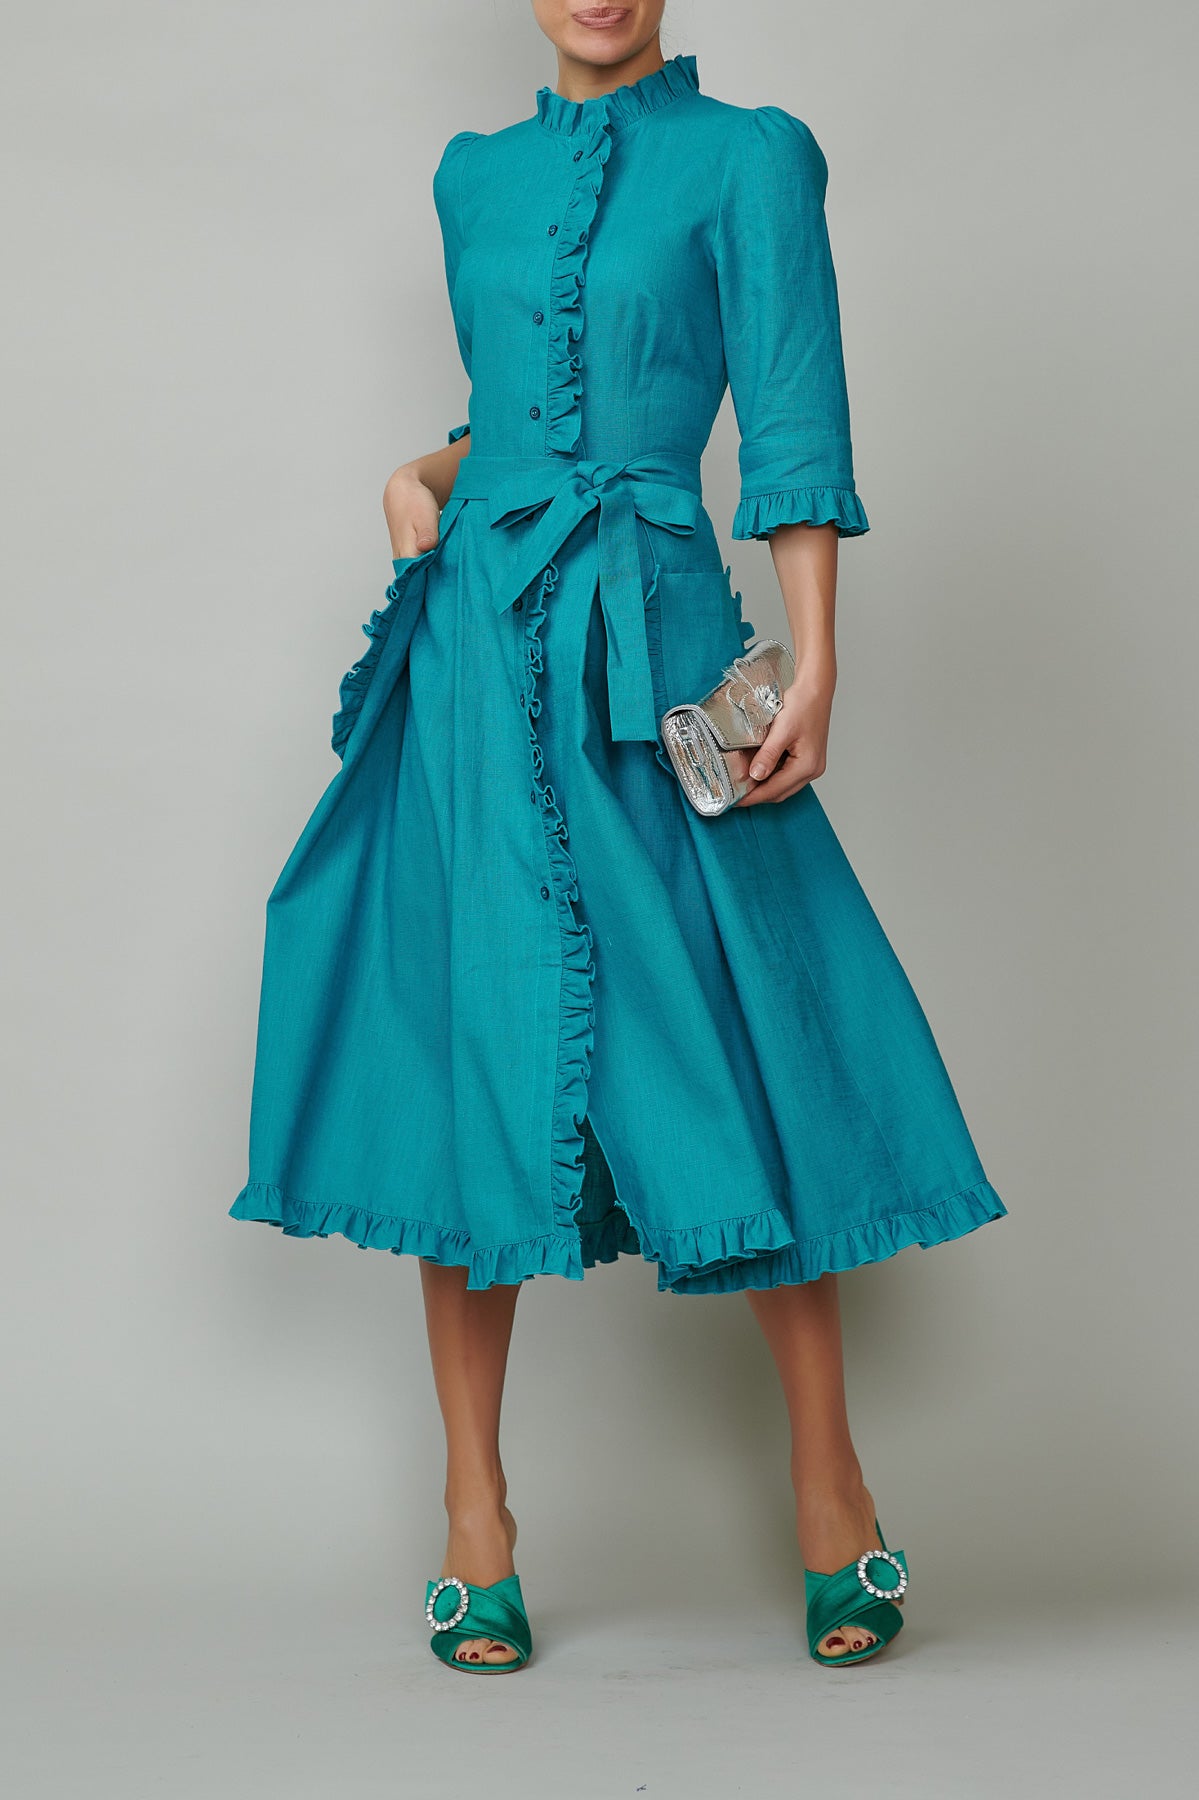 Shirt dress with applied pockets and ruffles, made of turquoise leather